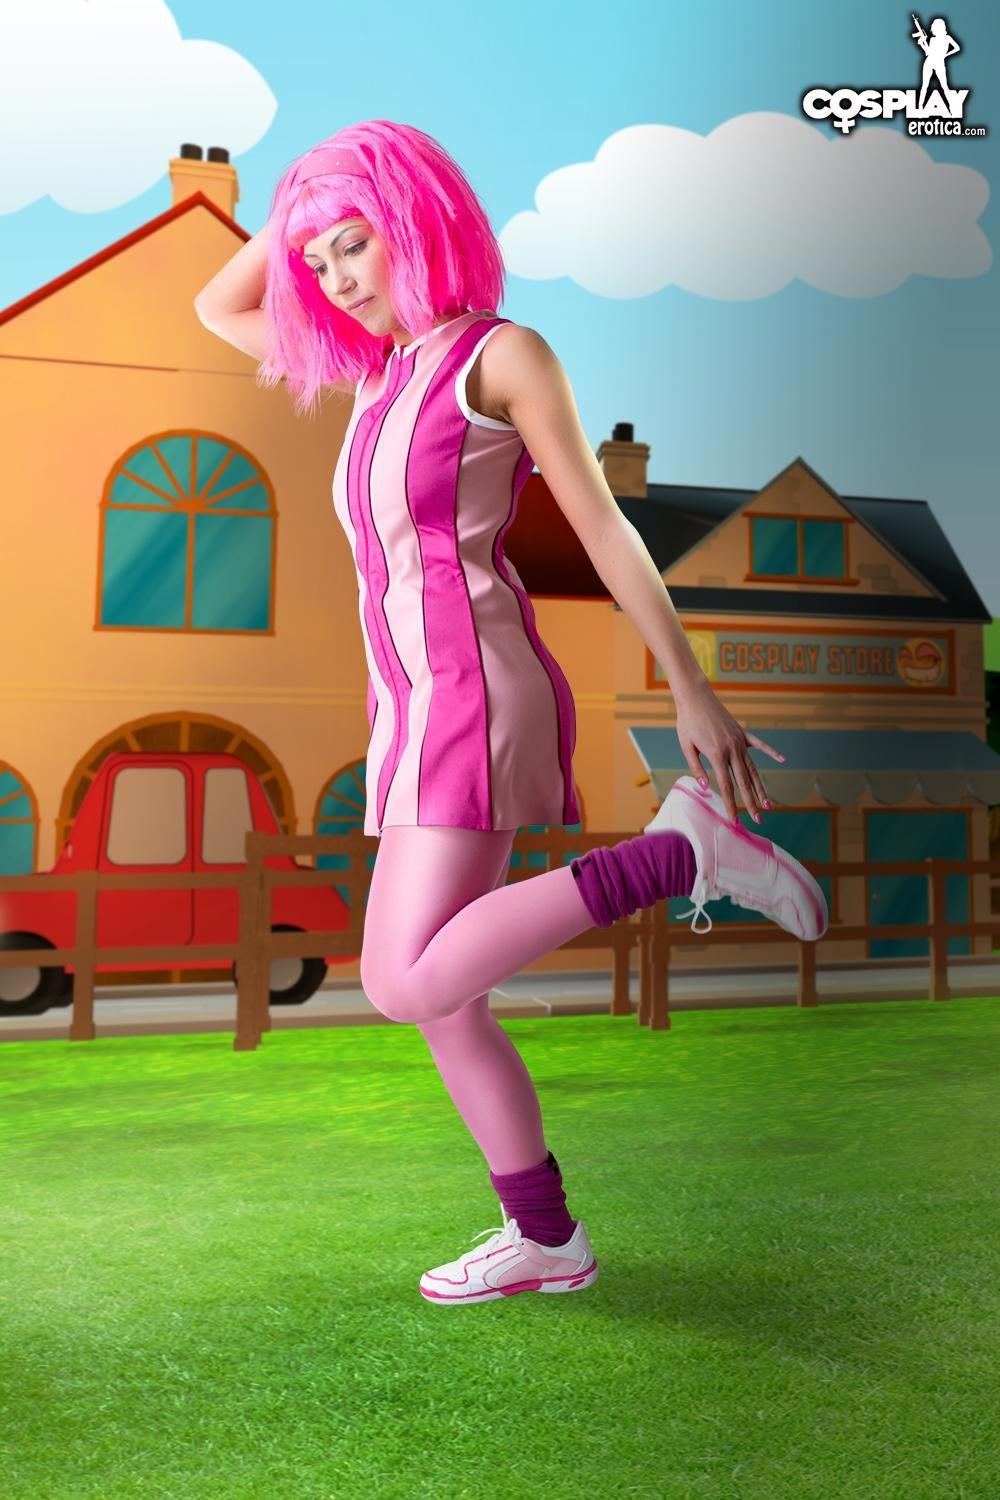 Stephanie is a fictional main character from the television show LazyTown at Cos